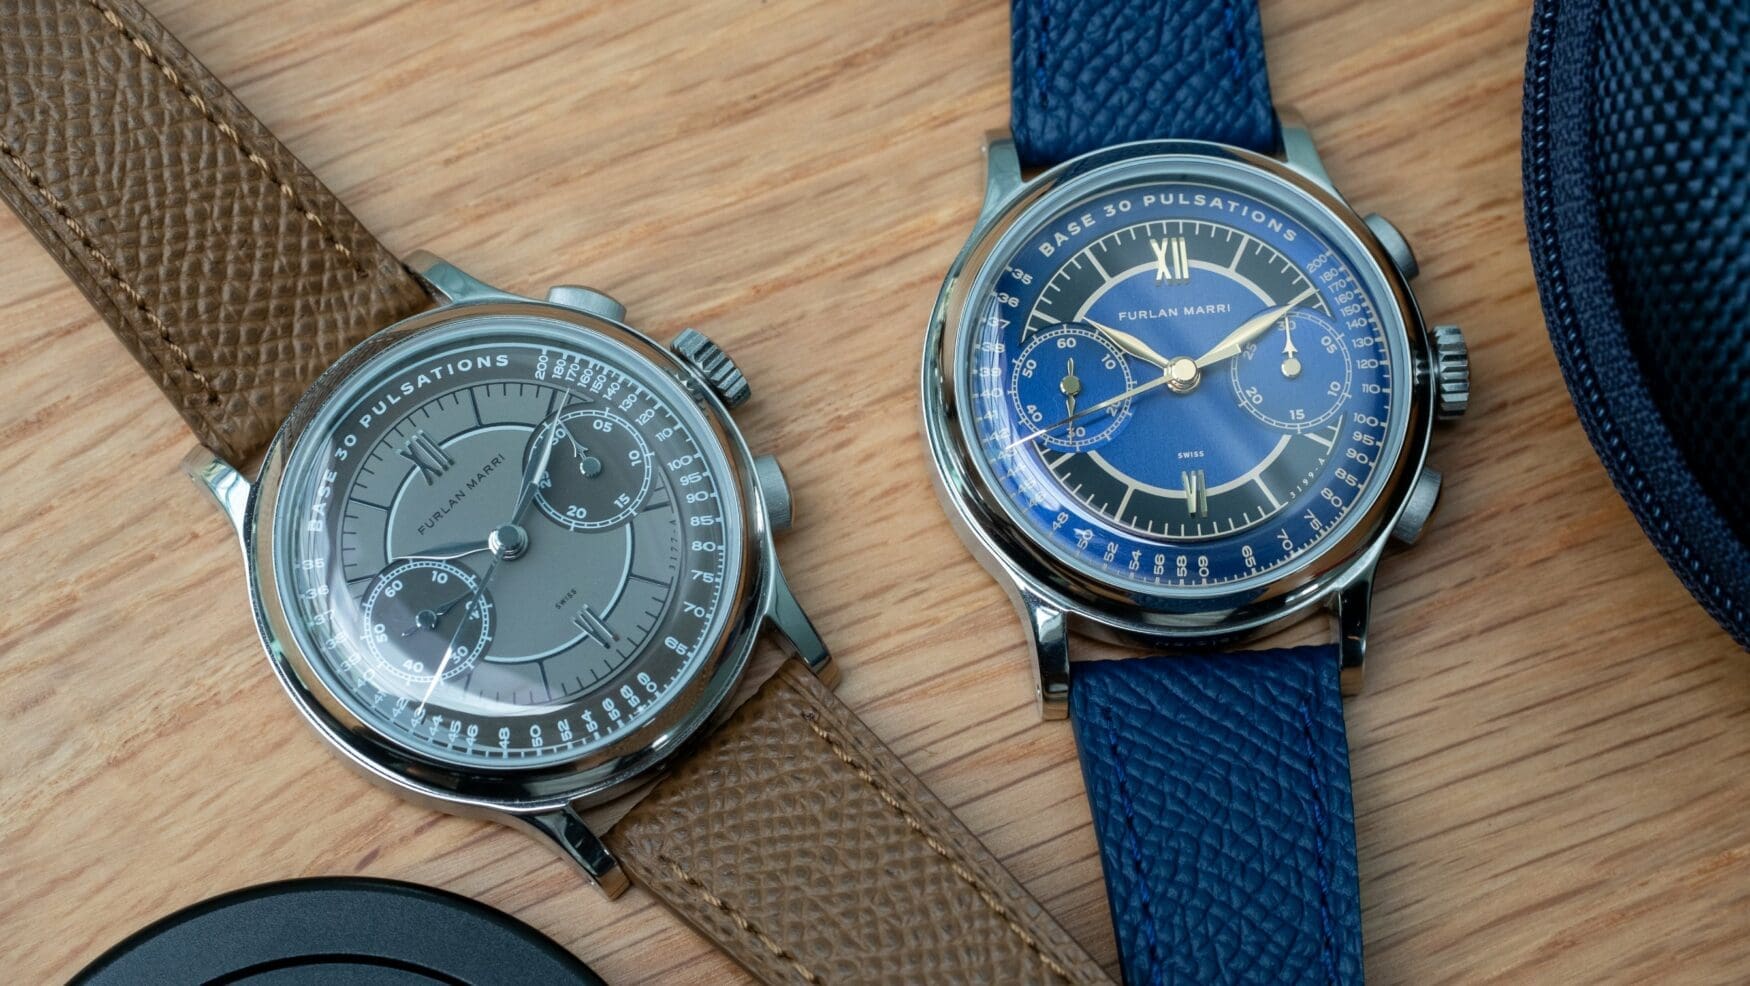 The Furlan Marri Flyback, and where it slots into the brand line-up